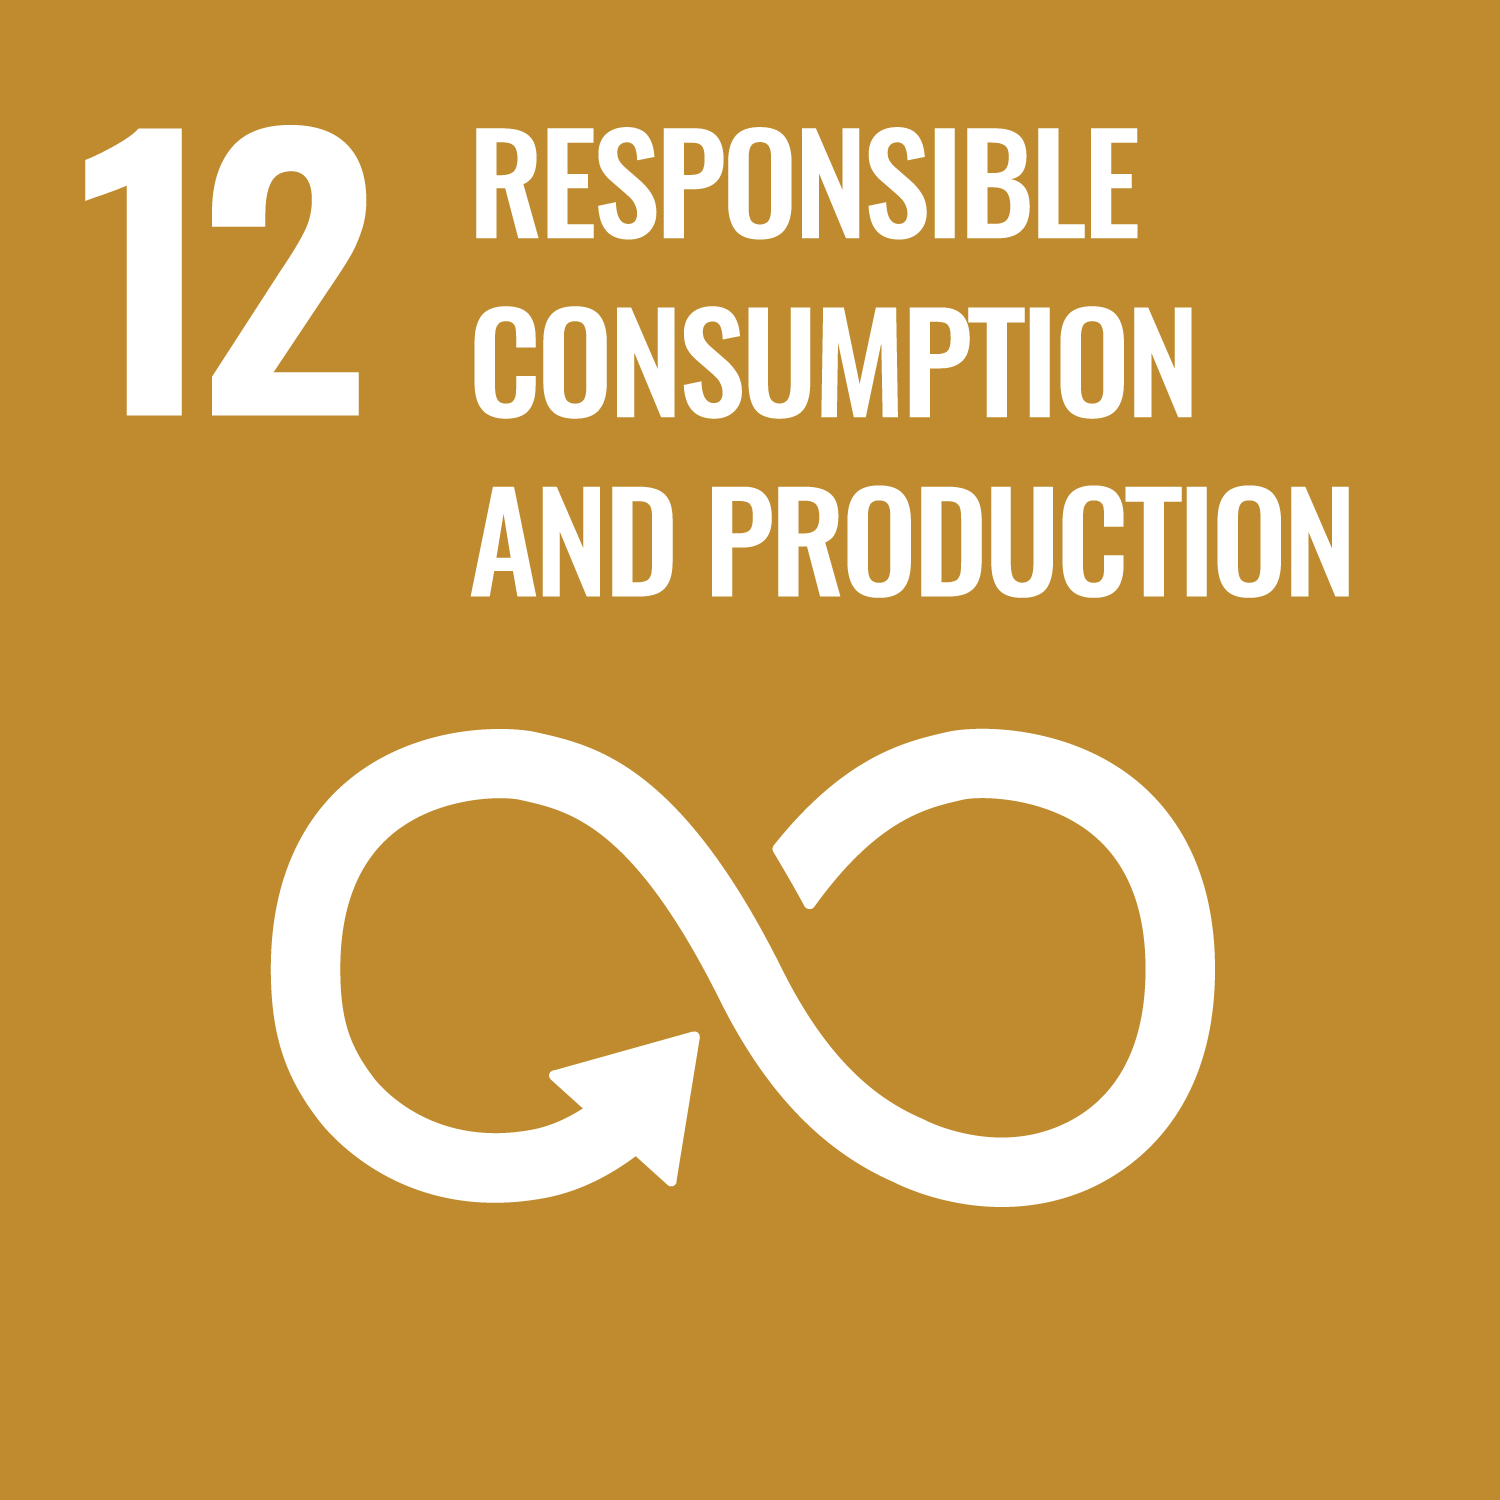 Responsible consumption and production.